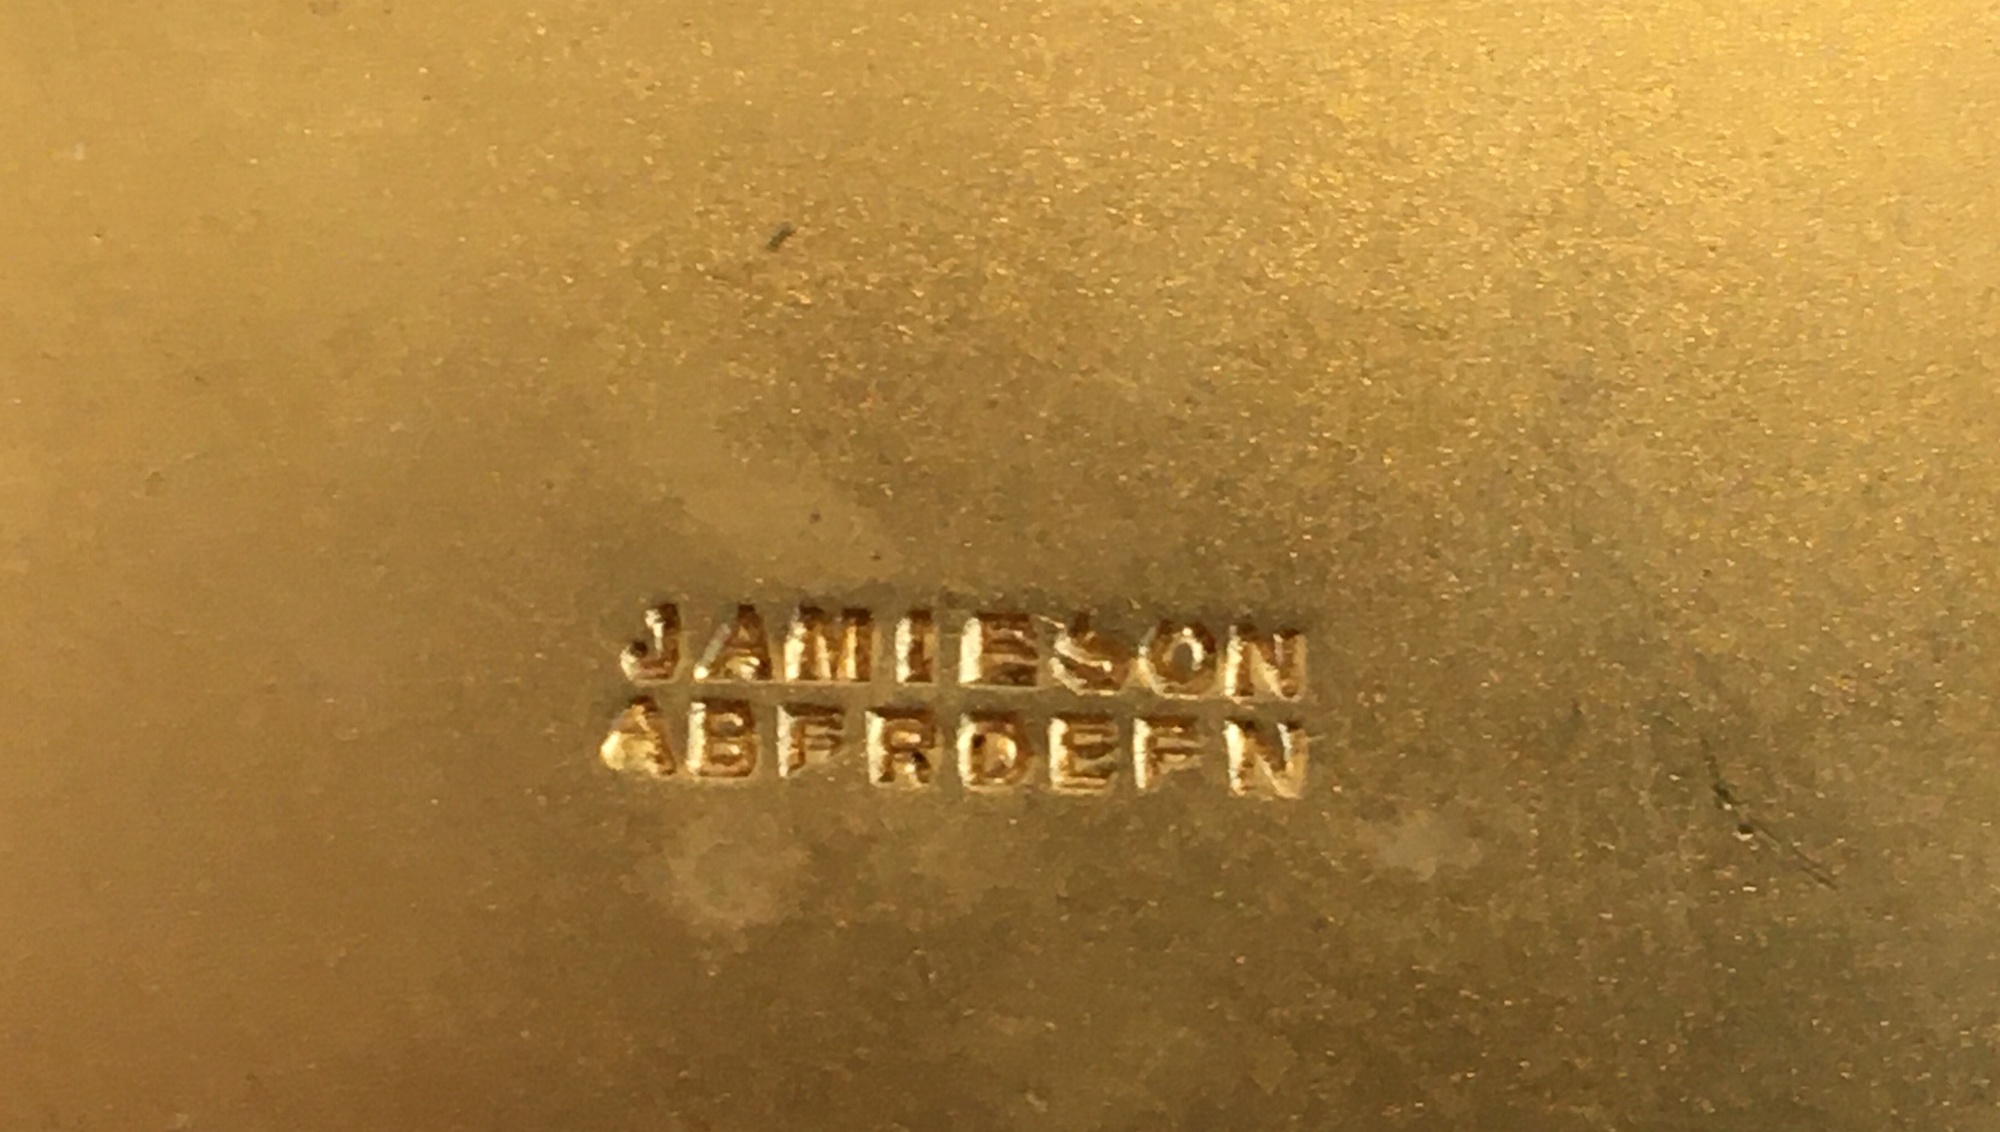 Antique Jamieson Aberdeen White Metal Snuff Box - 87mm x 58mm x 20mm - dated 1907. - Image 4 of 5